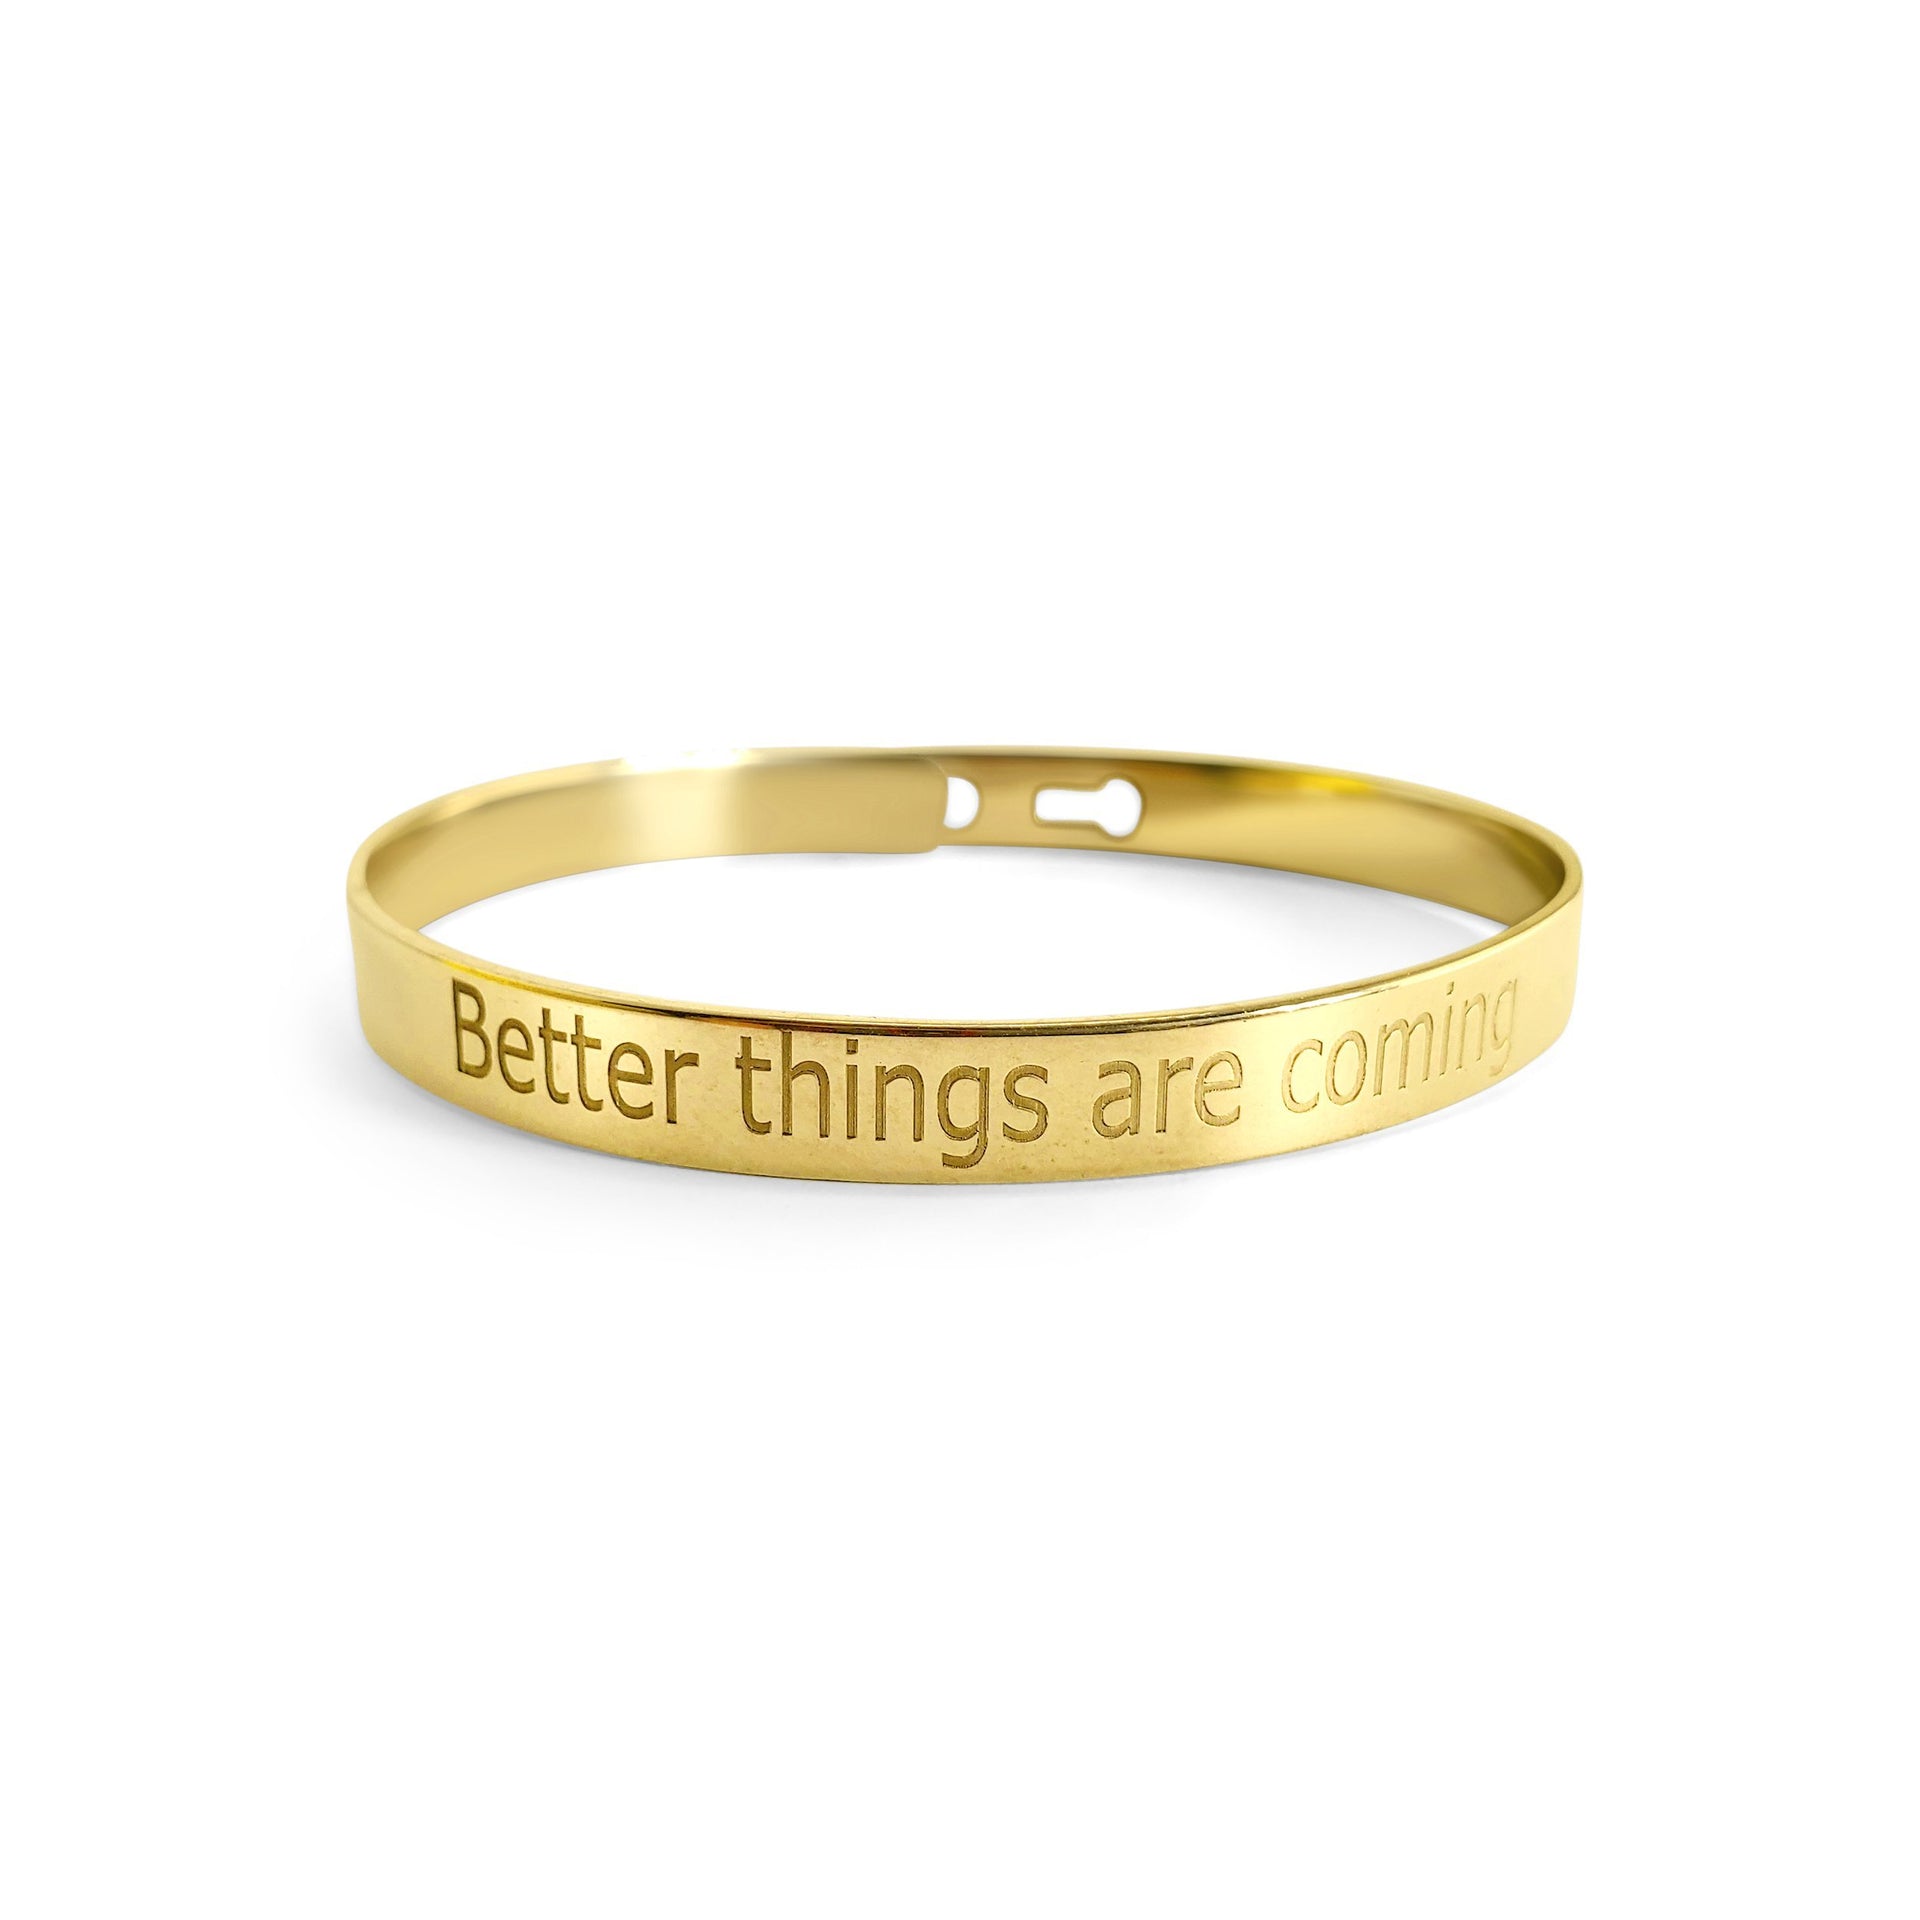 better things are coming gold bracelet